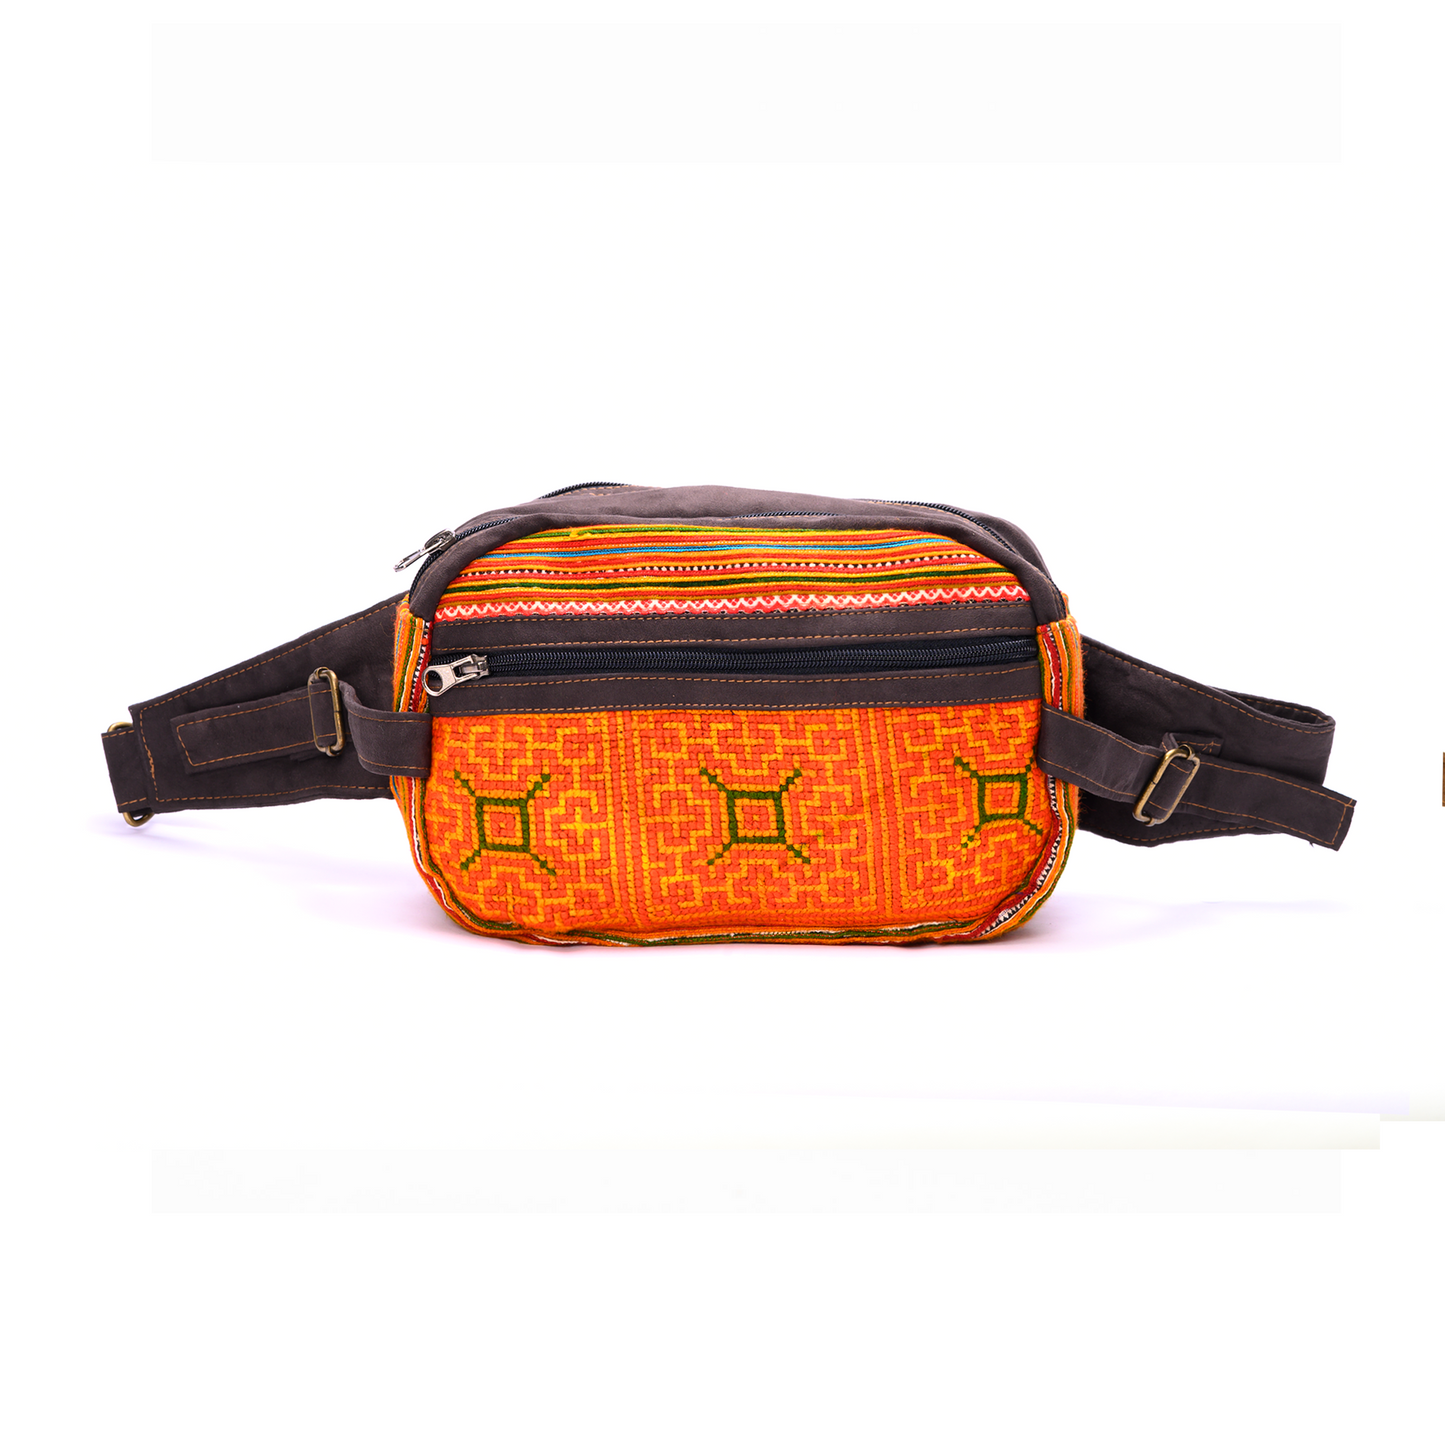 Bright Orange Waist bag, embroidery and faux leather